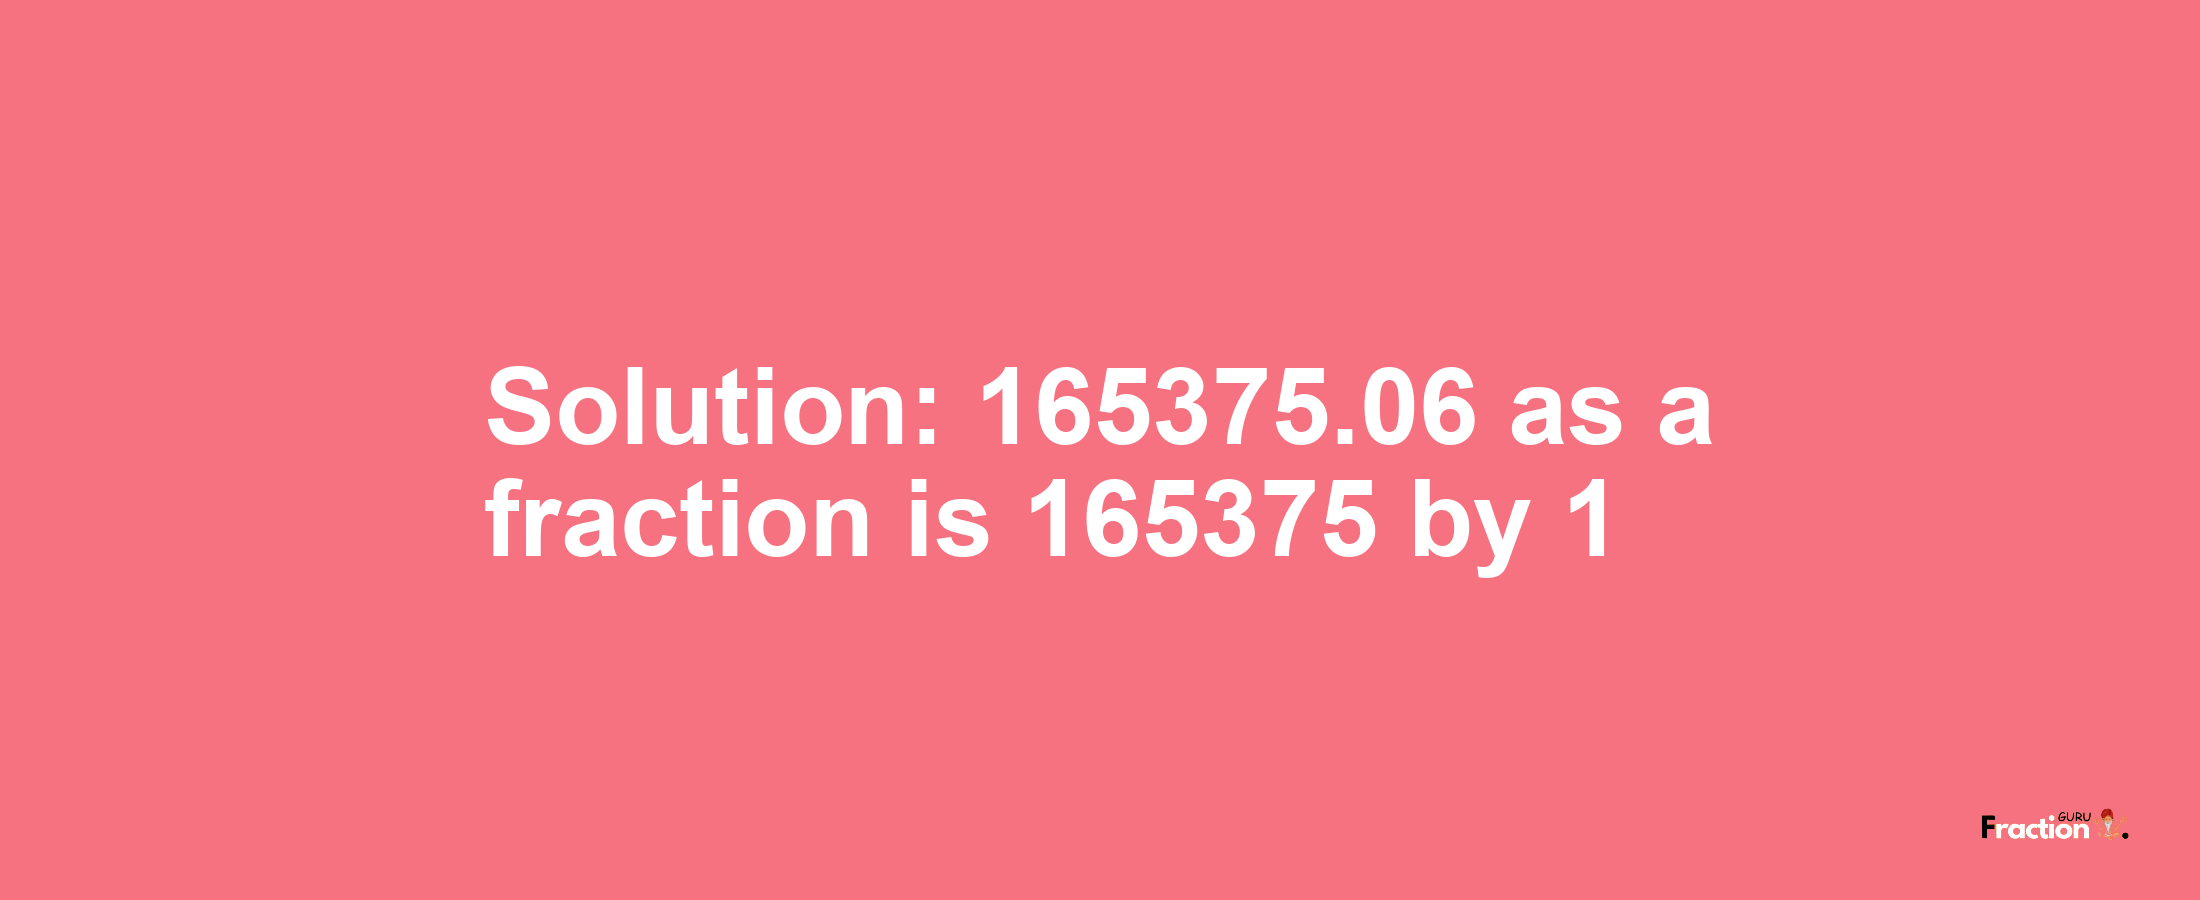 Solution:165375.06 as a fraction is 165375/1